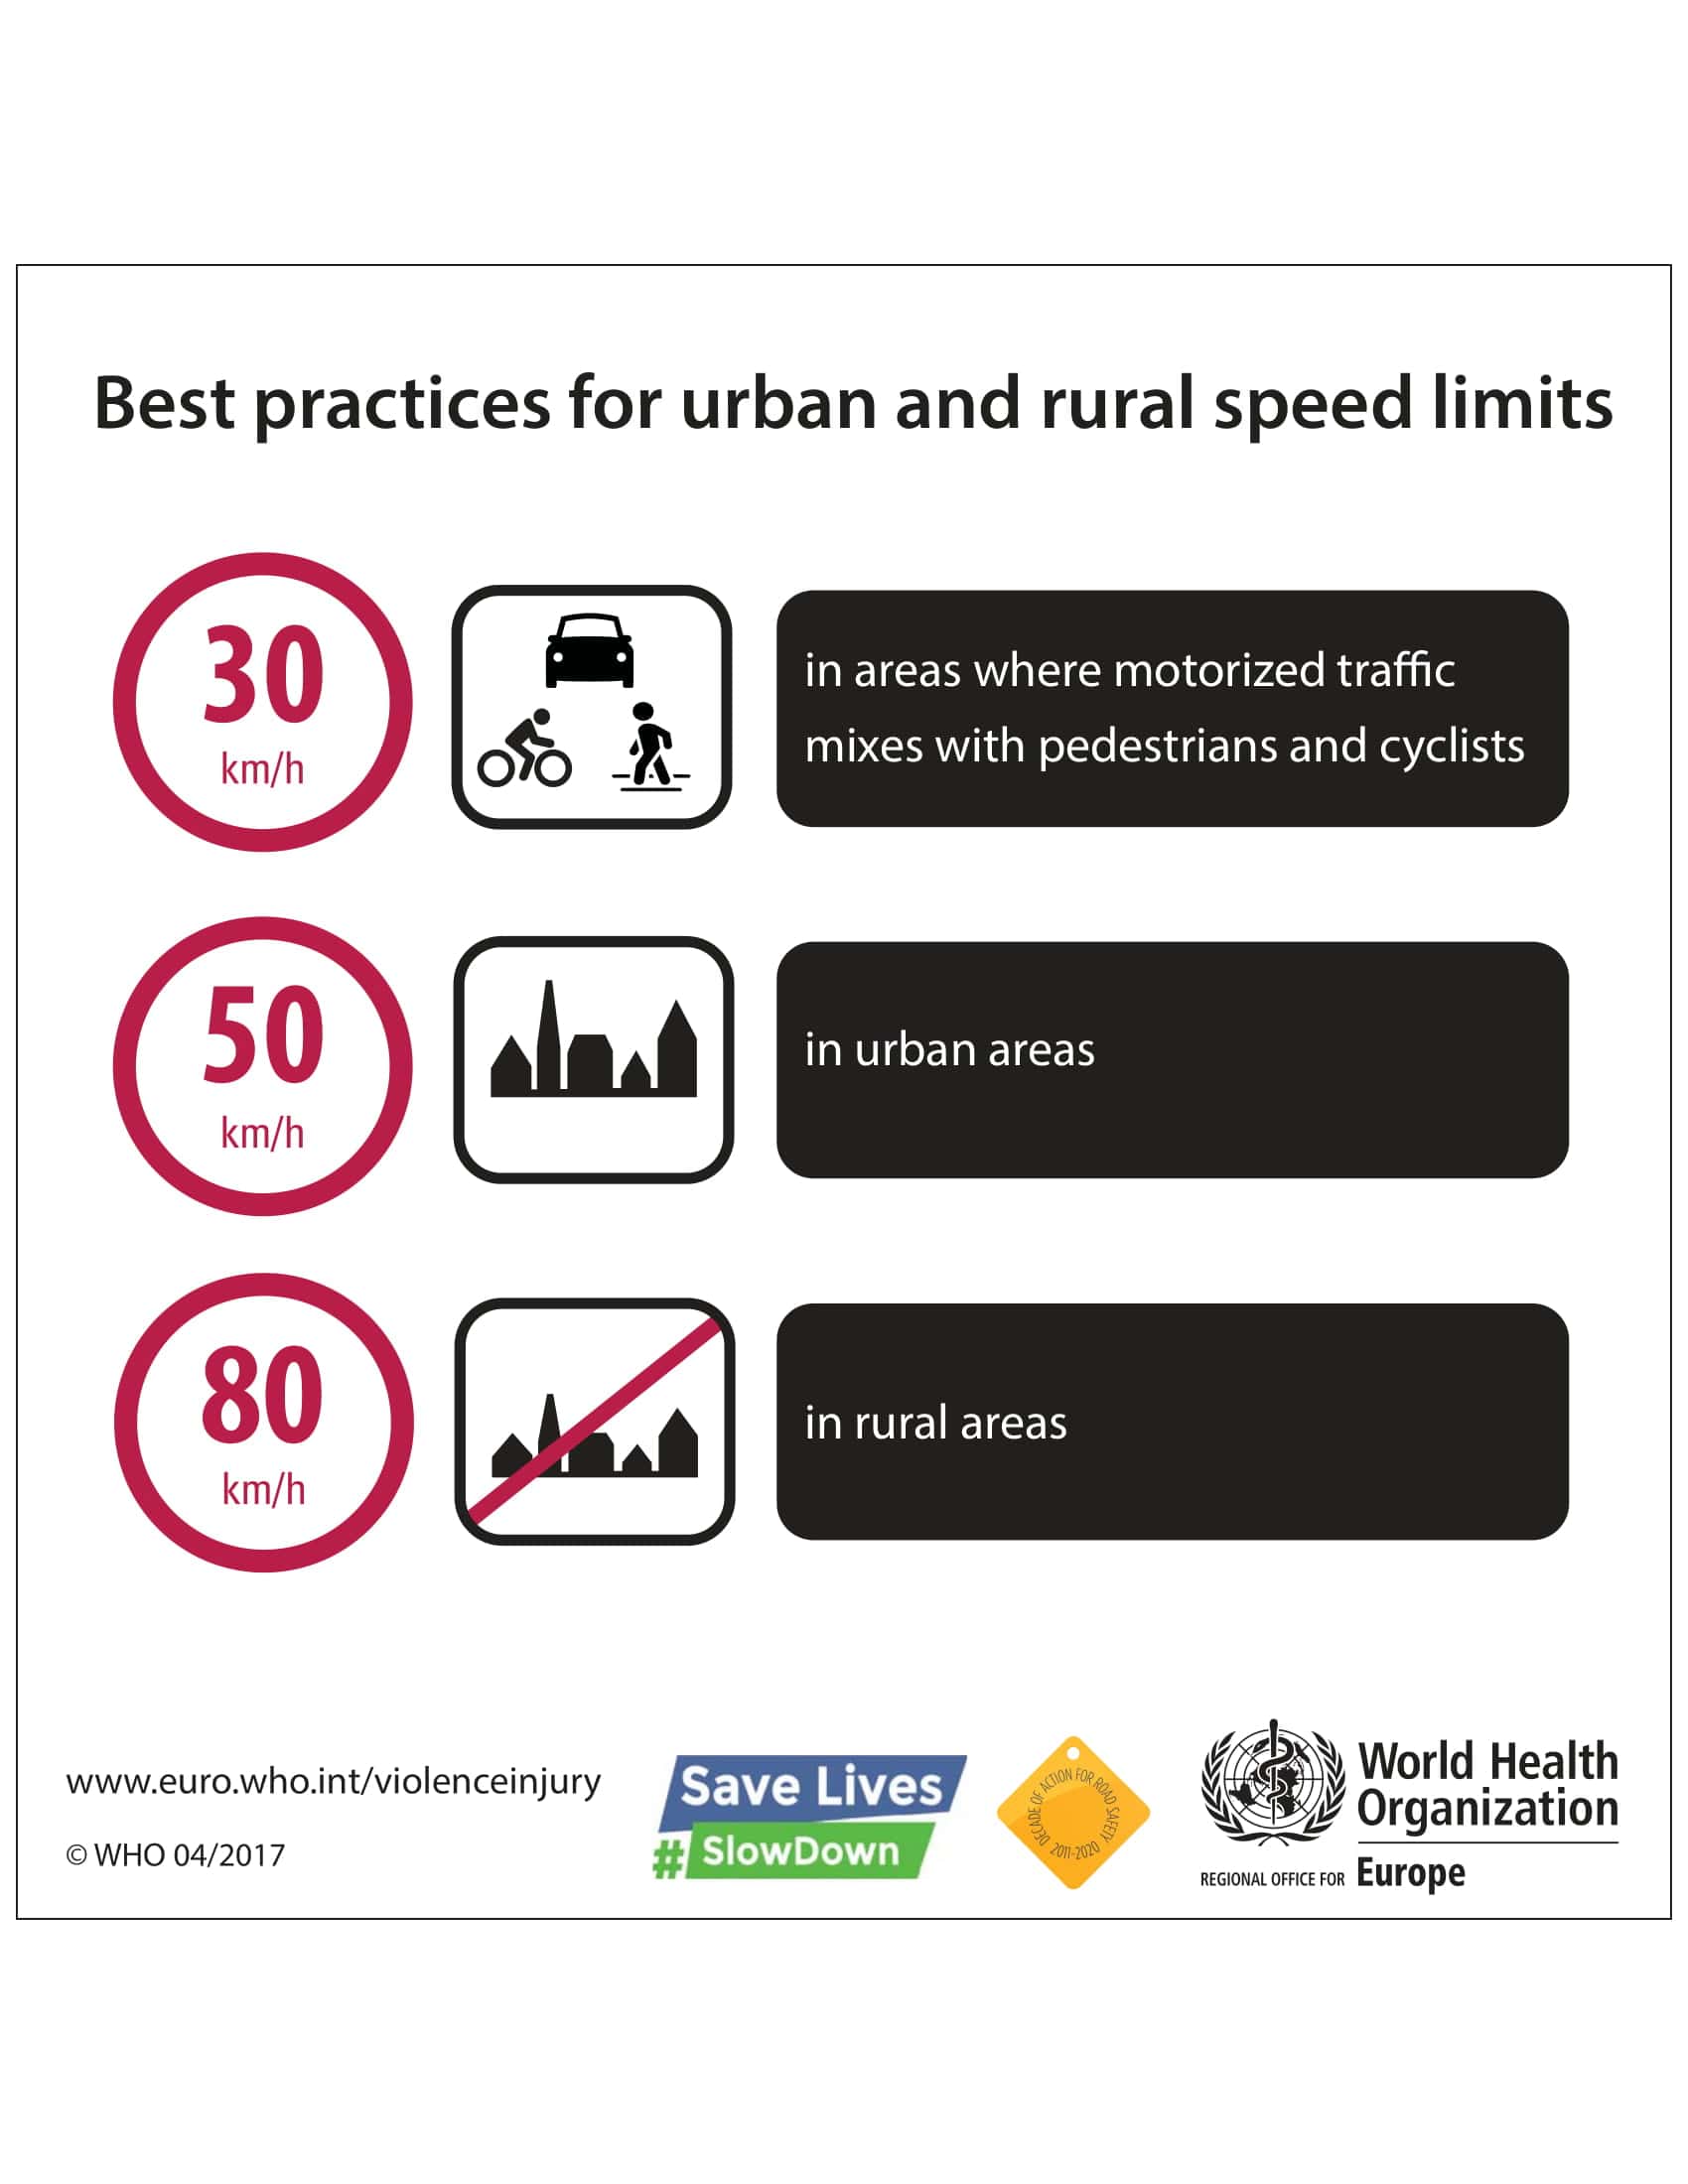 Best practices for urban and rural speed limits